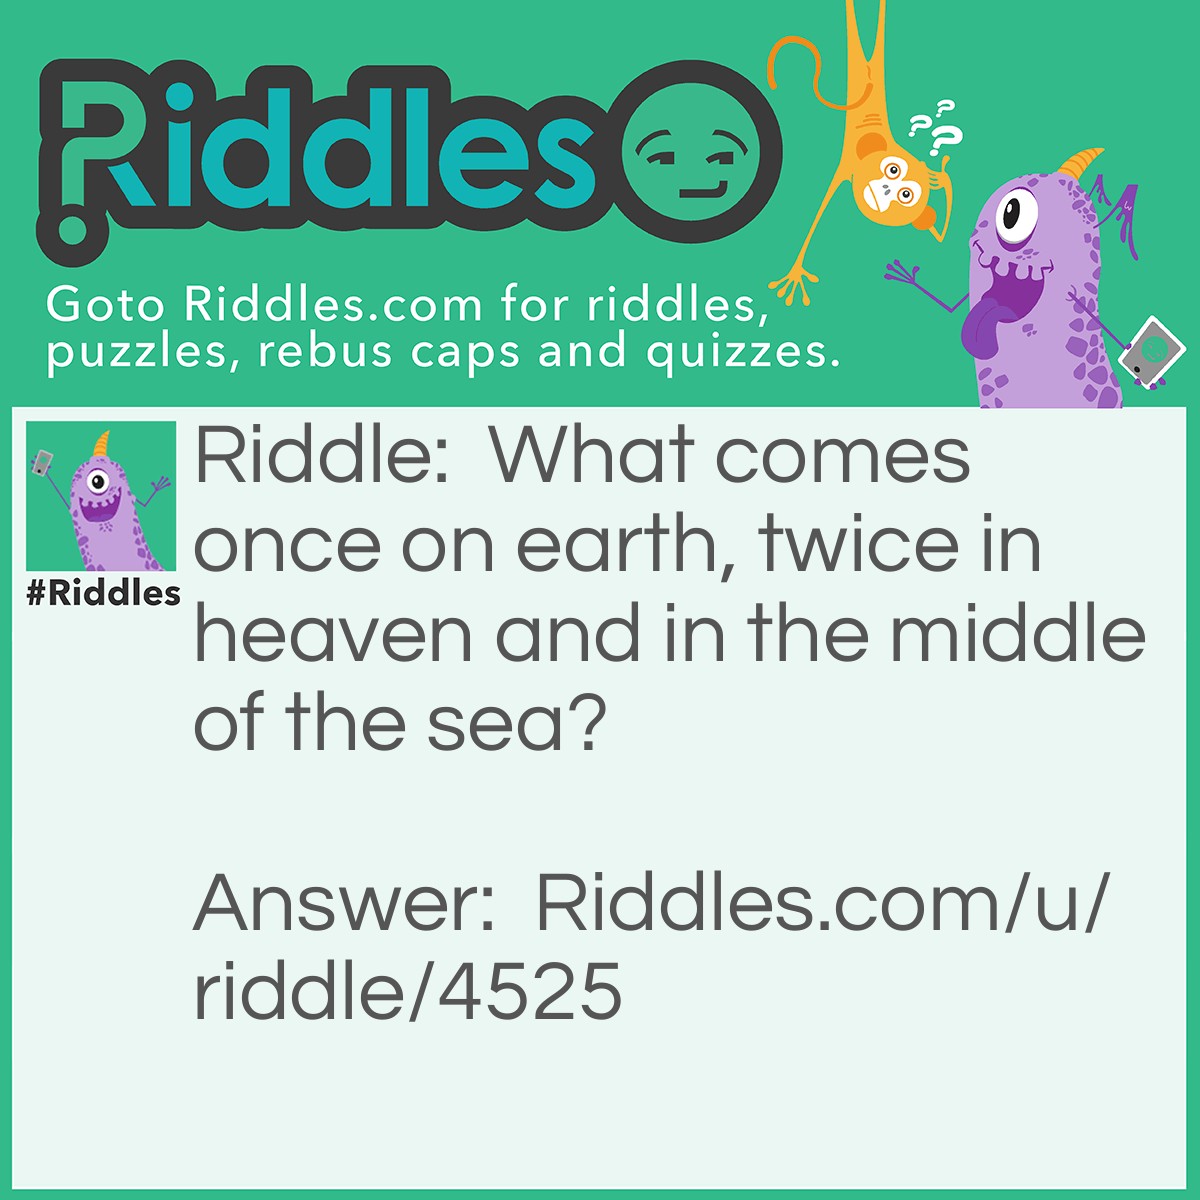 Riddle: What comes once on earth, twice in heaven and in the middle of the sea? Answer: The letter E Earth hEavEn and in the middle of the sEa.